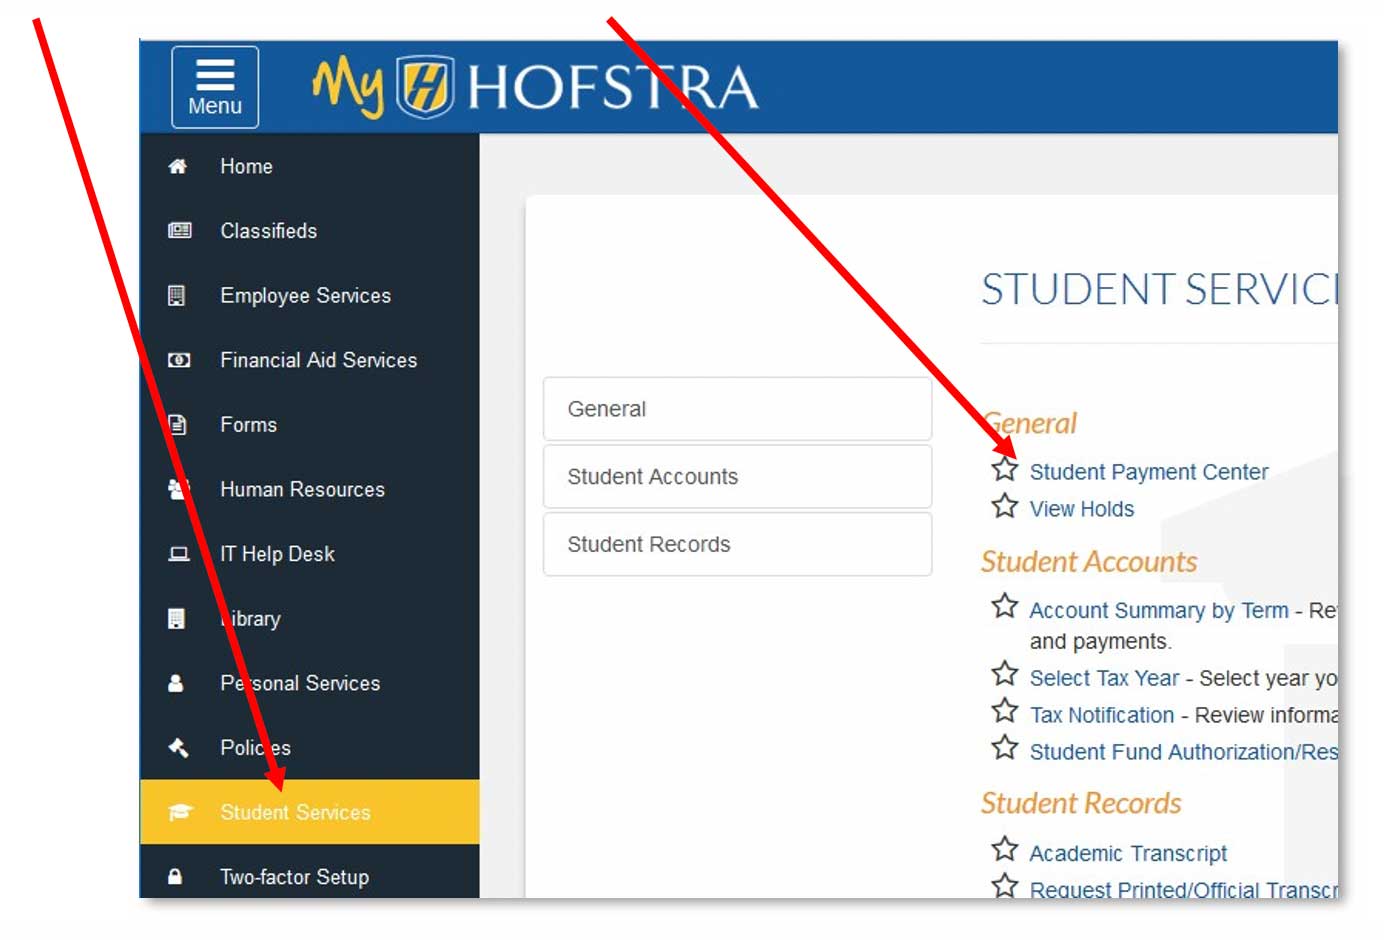 Under Student Services, select Student Payment Center